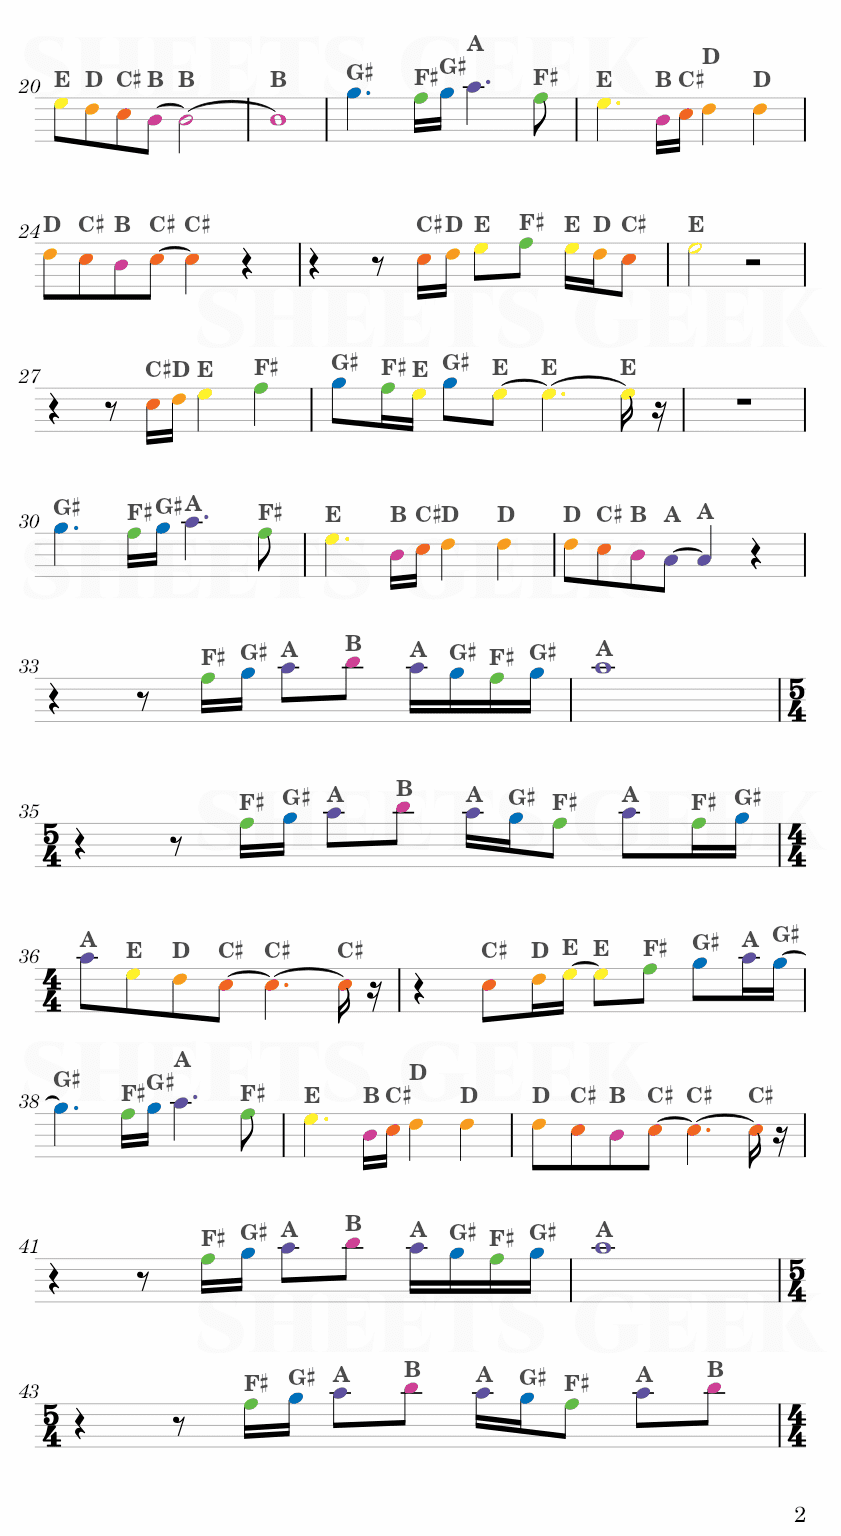 Chiquitita - ABBA Easy Sheet Music Free for piano, keyboard, flute, violin, sax, cello page 2